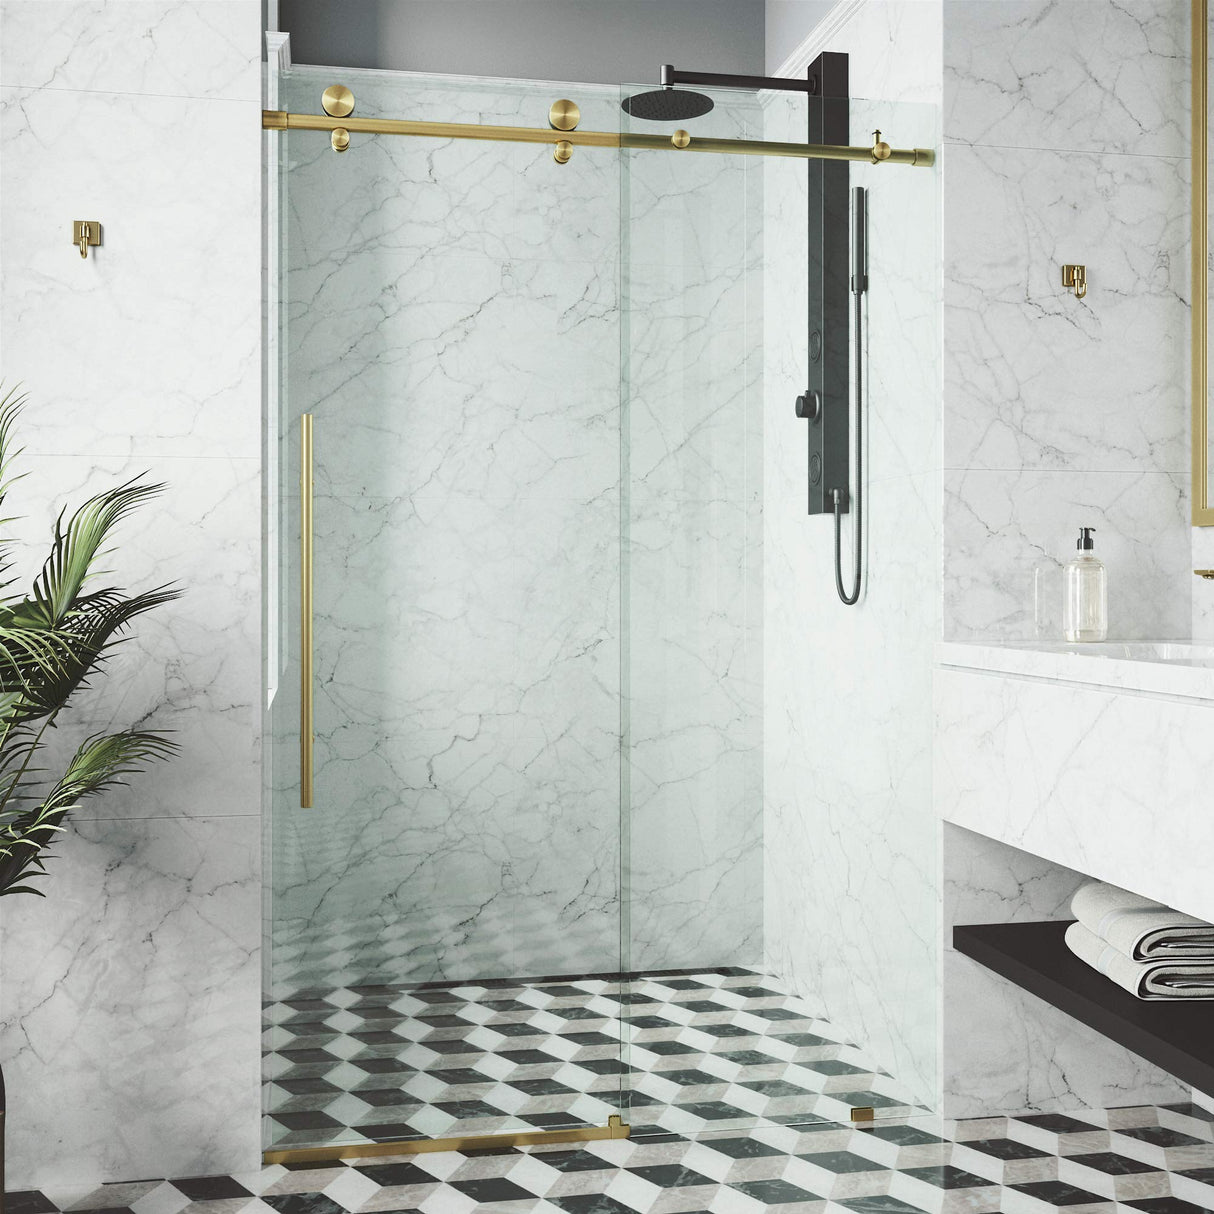 VIGO Adjustable 52-56"W x 76"H Elan E-Class Frameless Sliding Rectangle Shower Door with Clear Tempered Glass, Reversible Door Handle and Stainless Steel Hardware in Matte Brushed Gold-VG6021MGCL5676